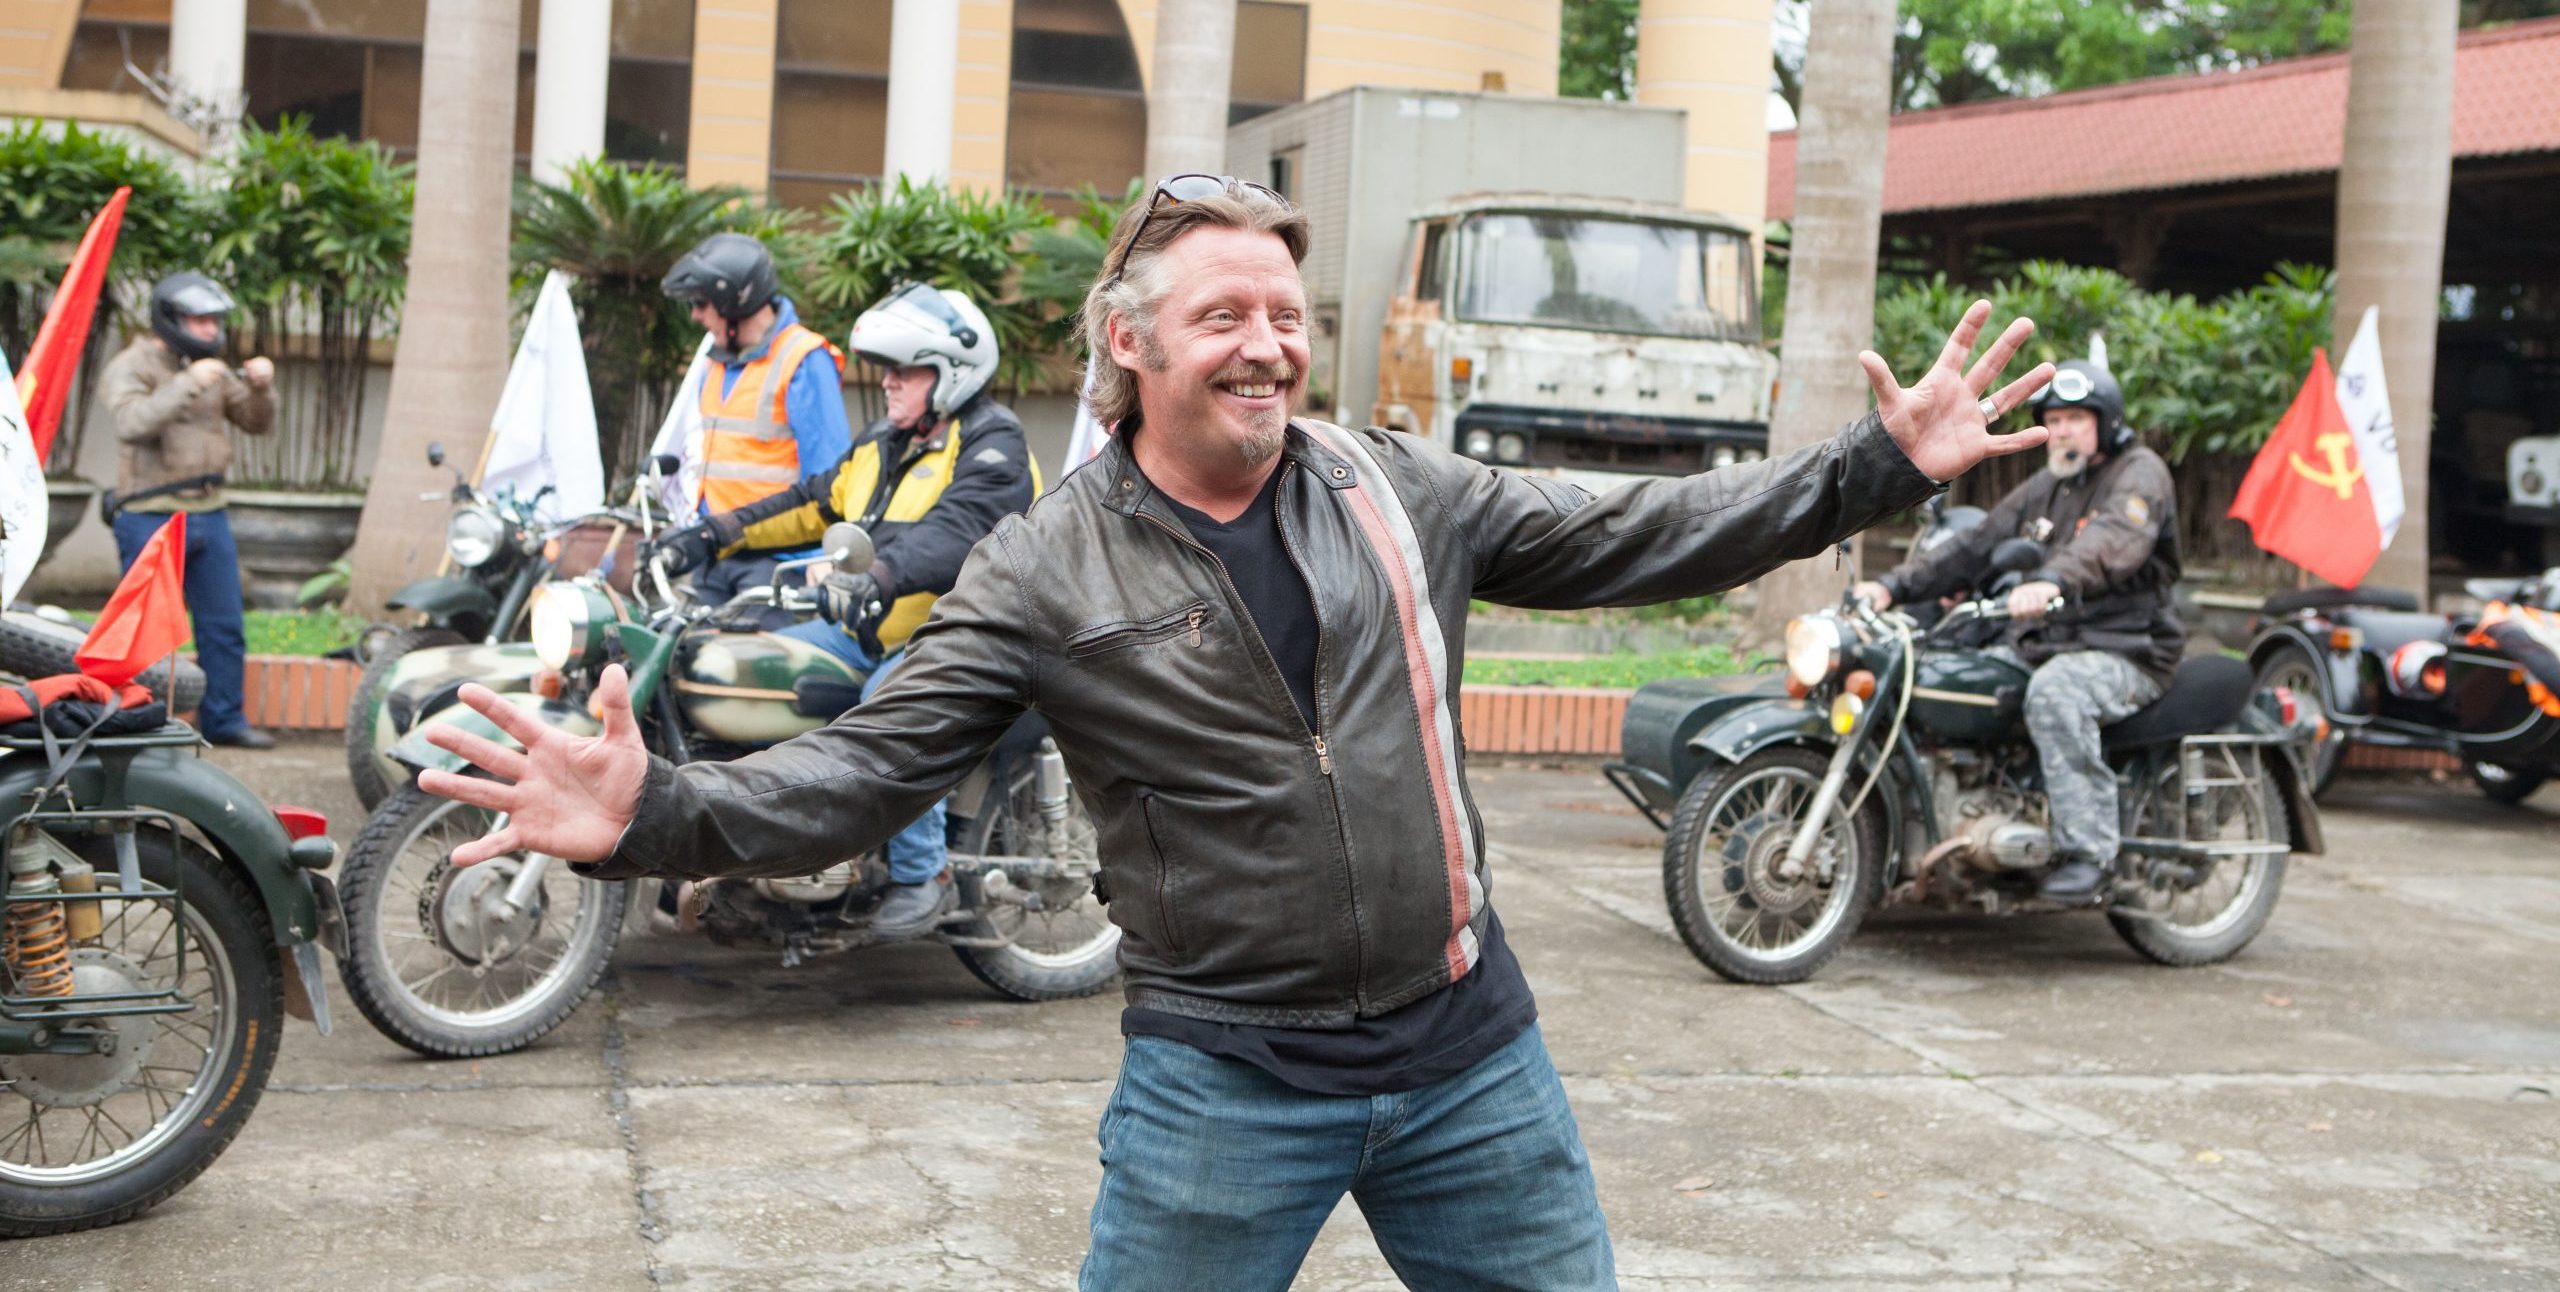 Charley Boorman having fun at Rally Indochina while filming his awesome motorcycle TV show, Freedom Riders Asia